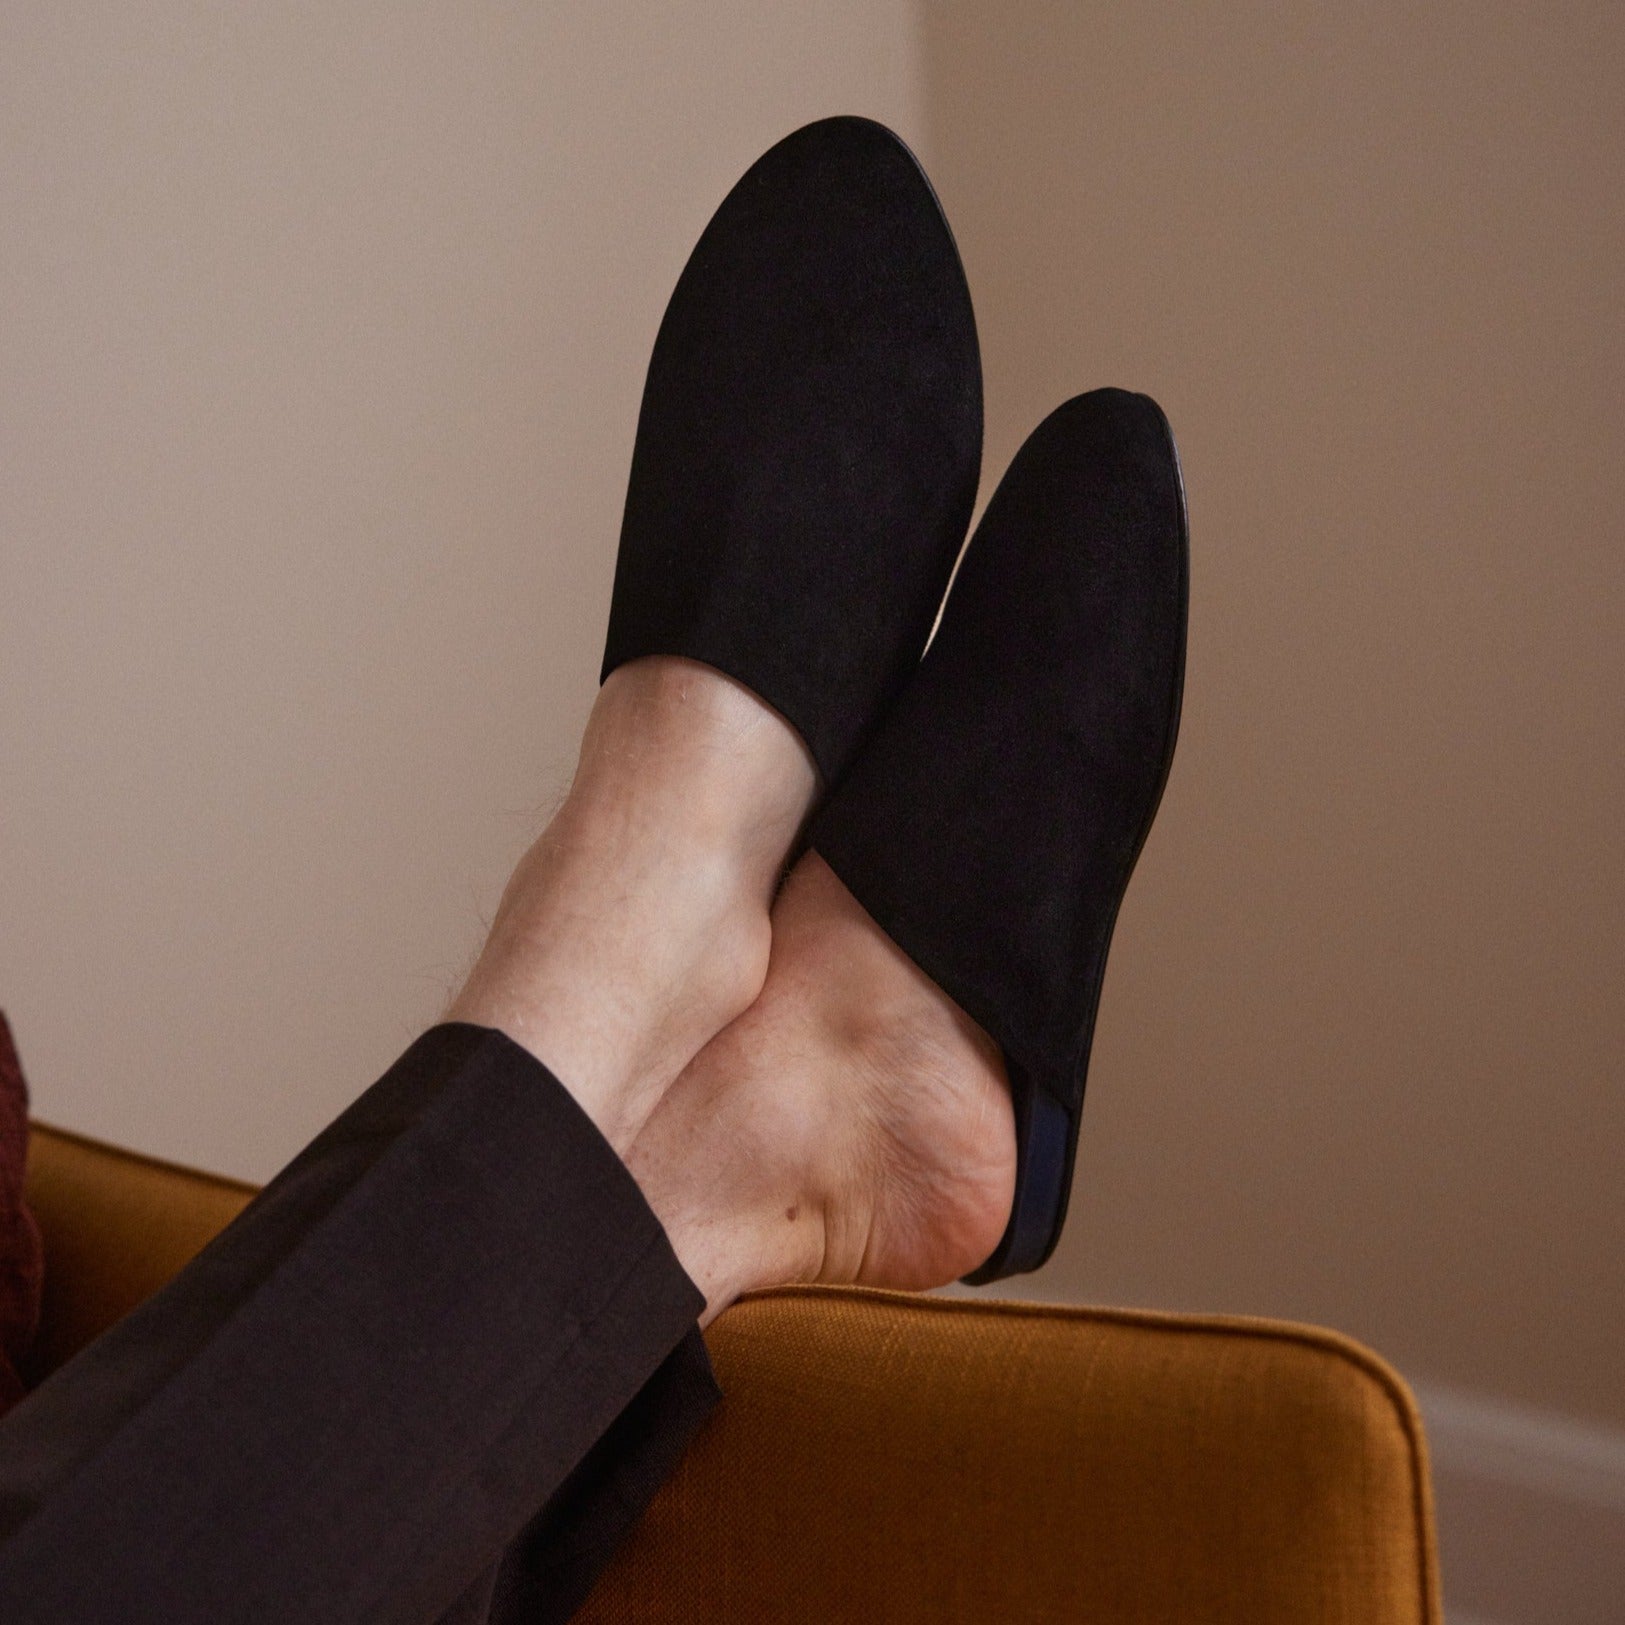 Inabo Men's Black Suede house Slipper worn by a man with his feet up on a couch